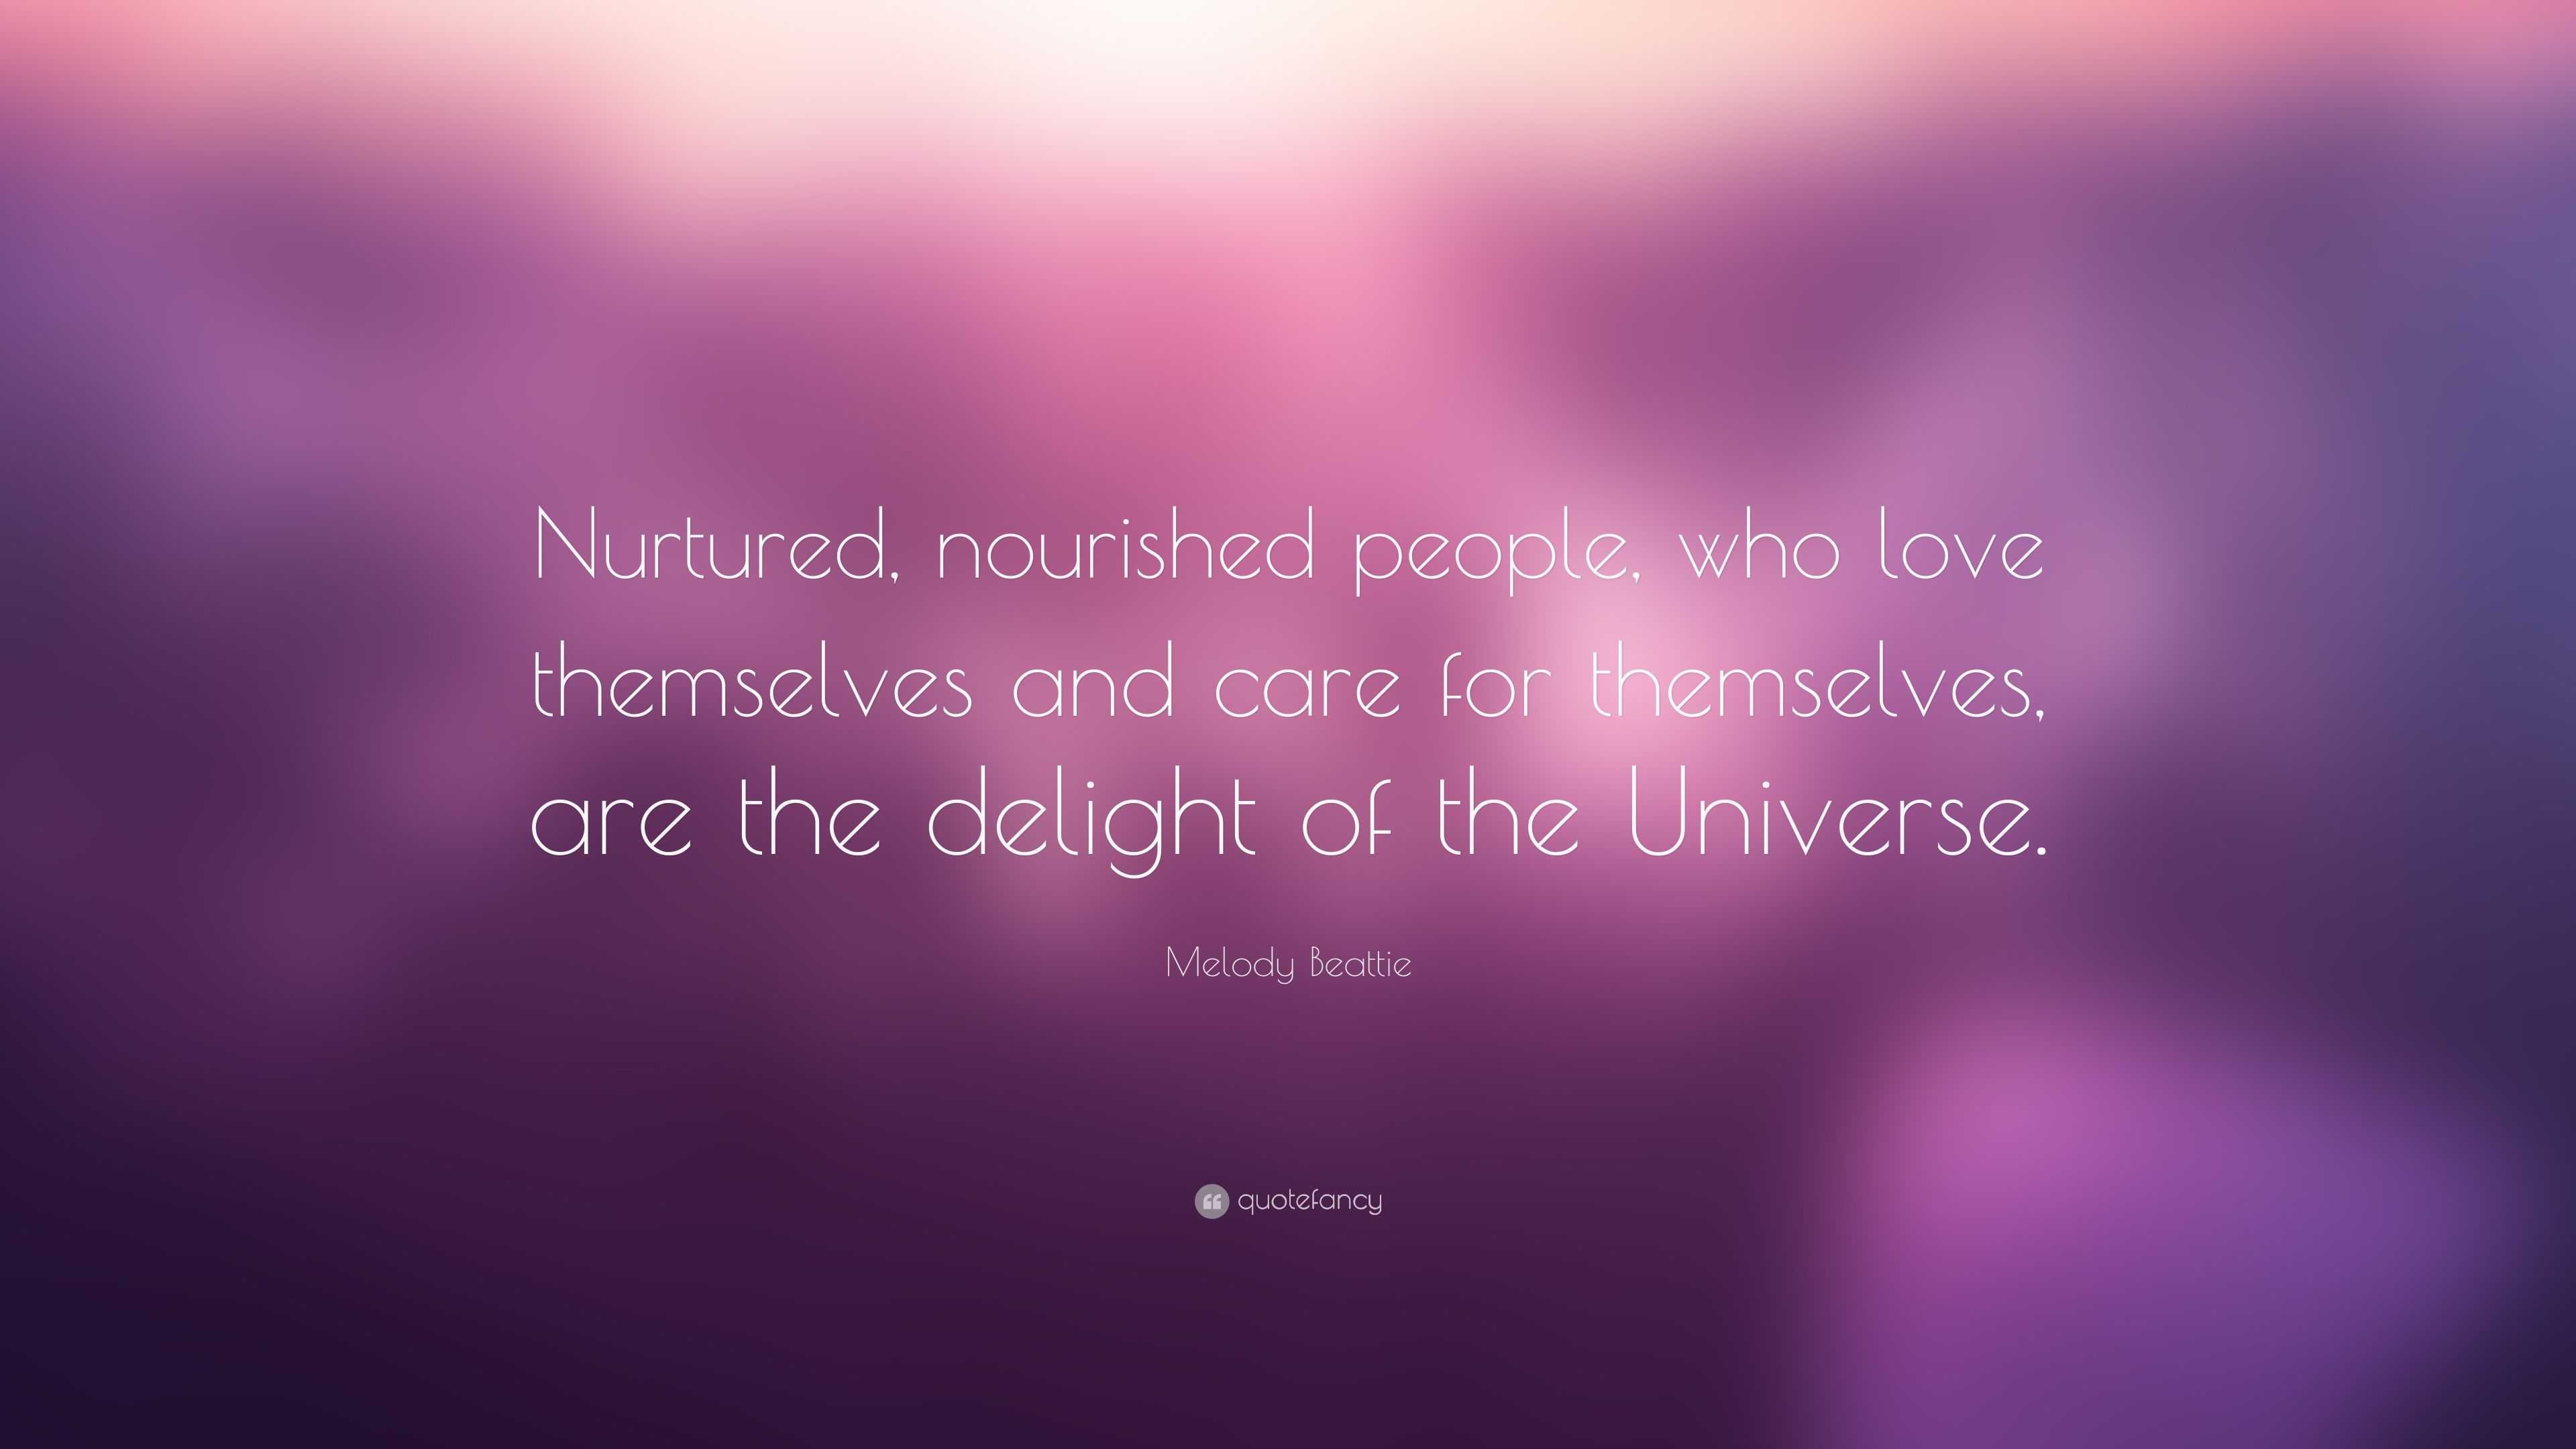 Melody Beattie Quote: “Nurtured, nourished people, who love themselves ...